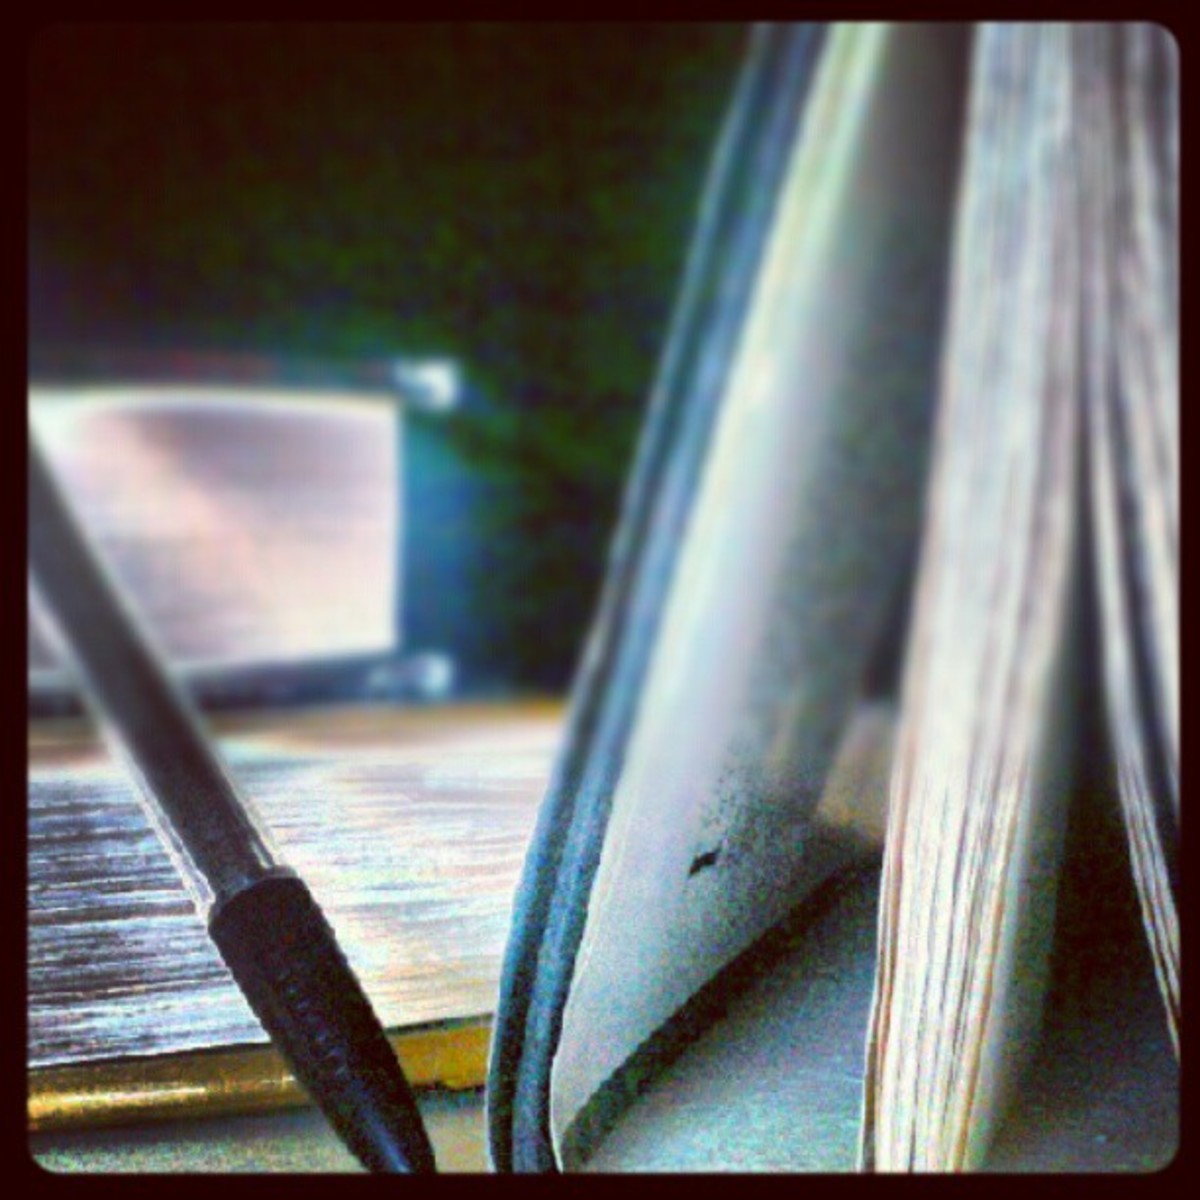 Book and pencil